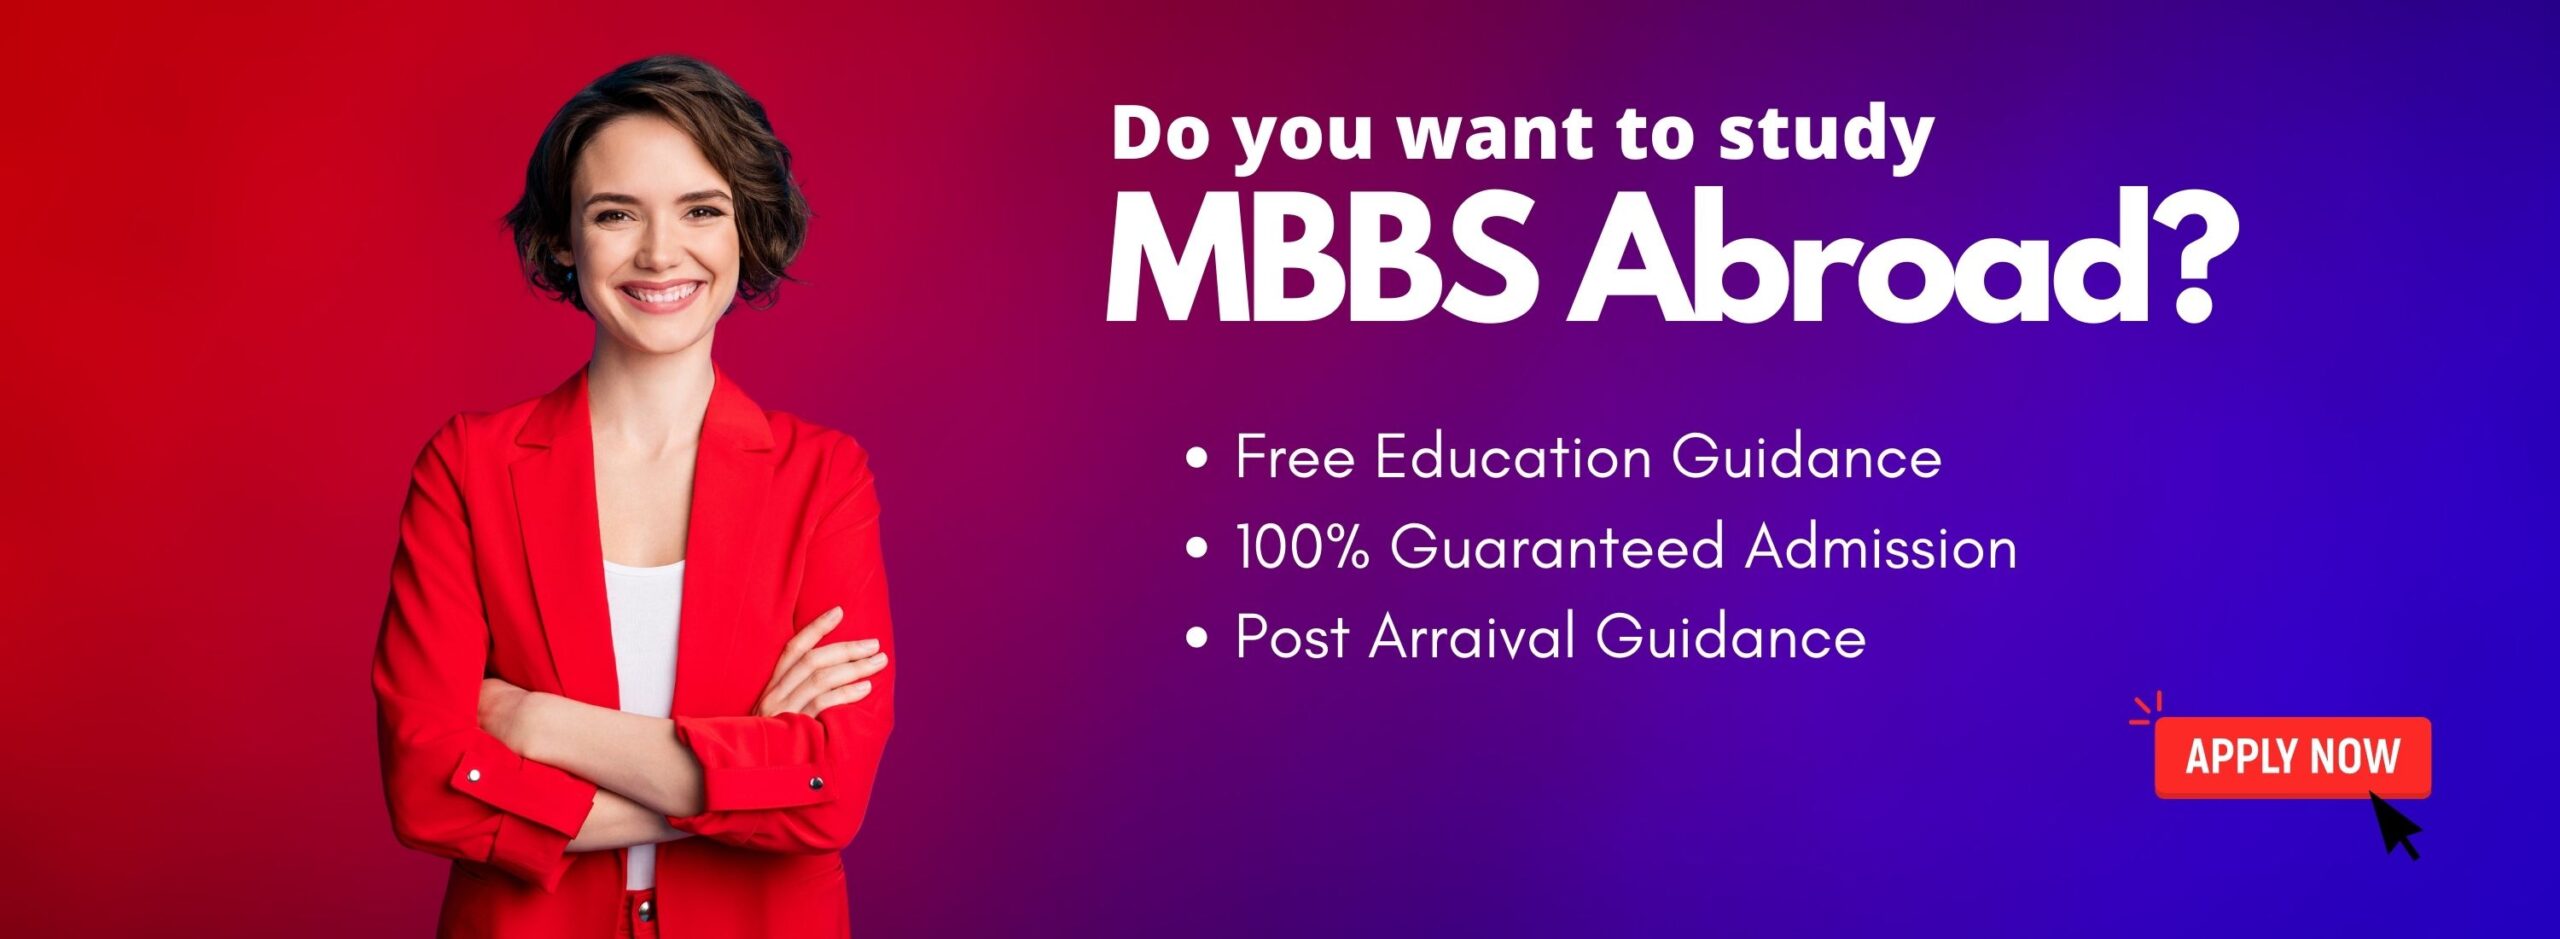 Study MBBS Abroad with KCR CONSULTANTS